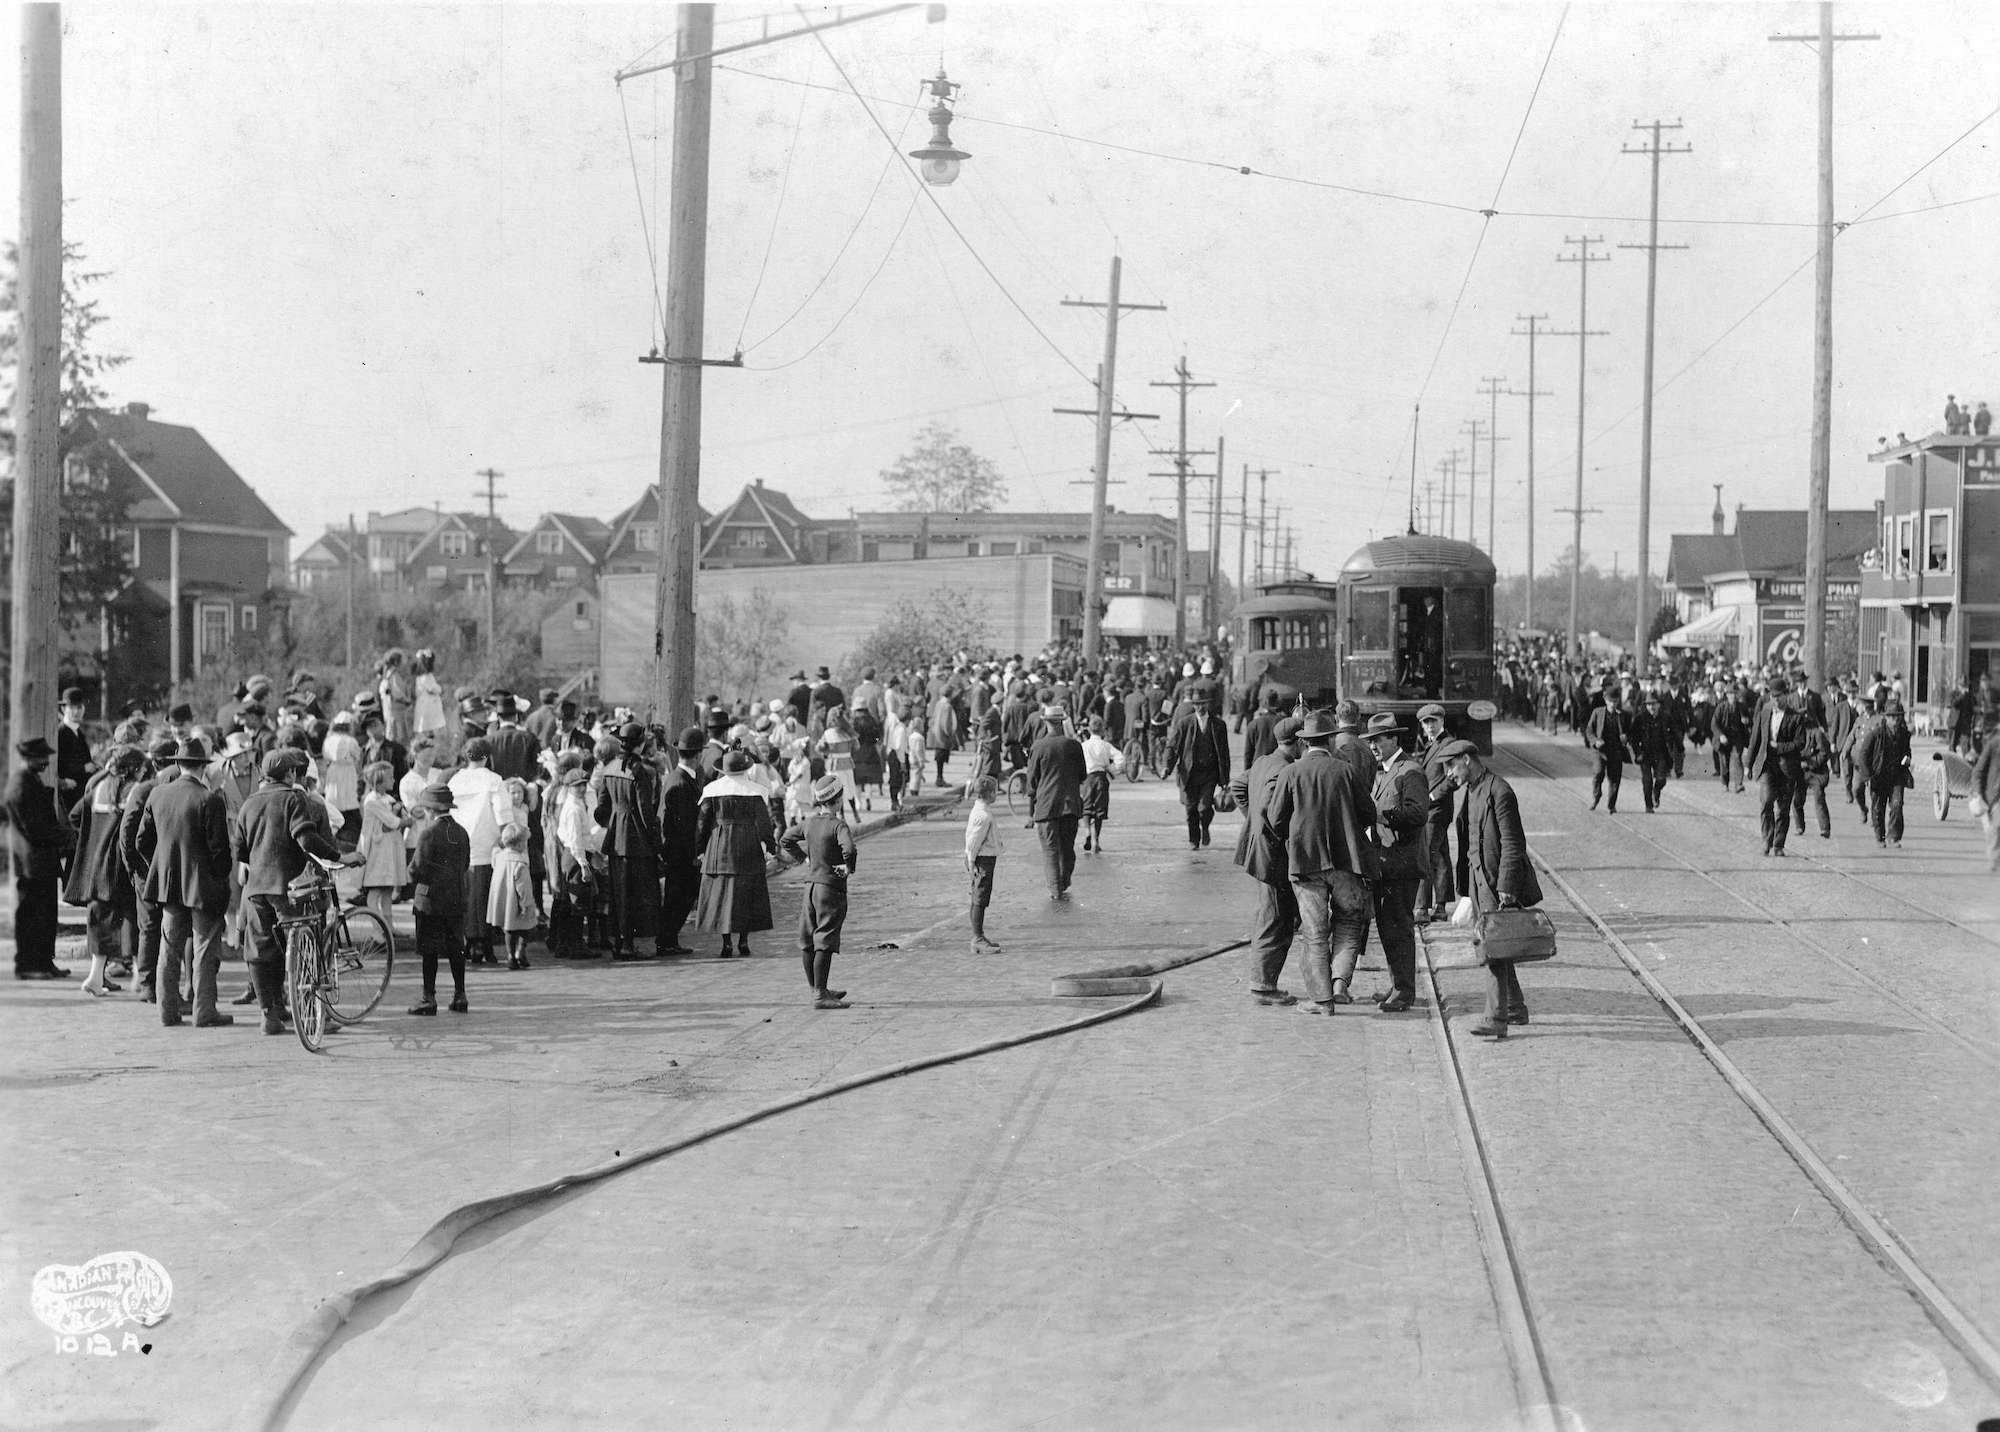 1918 - Crowds gather after a streetcar was derailed by the No. 11 V.F.D. hosewagon at 12th Avenue and Commercial Drive